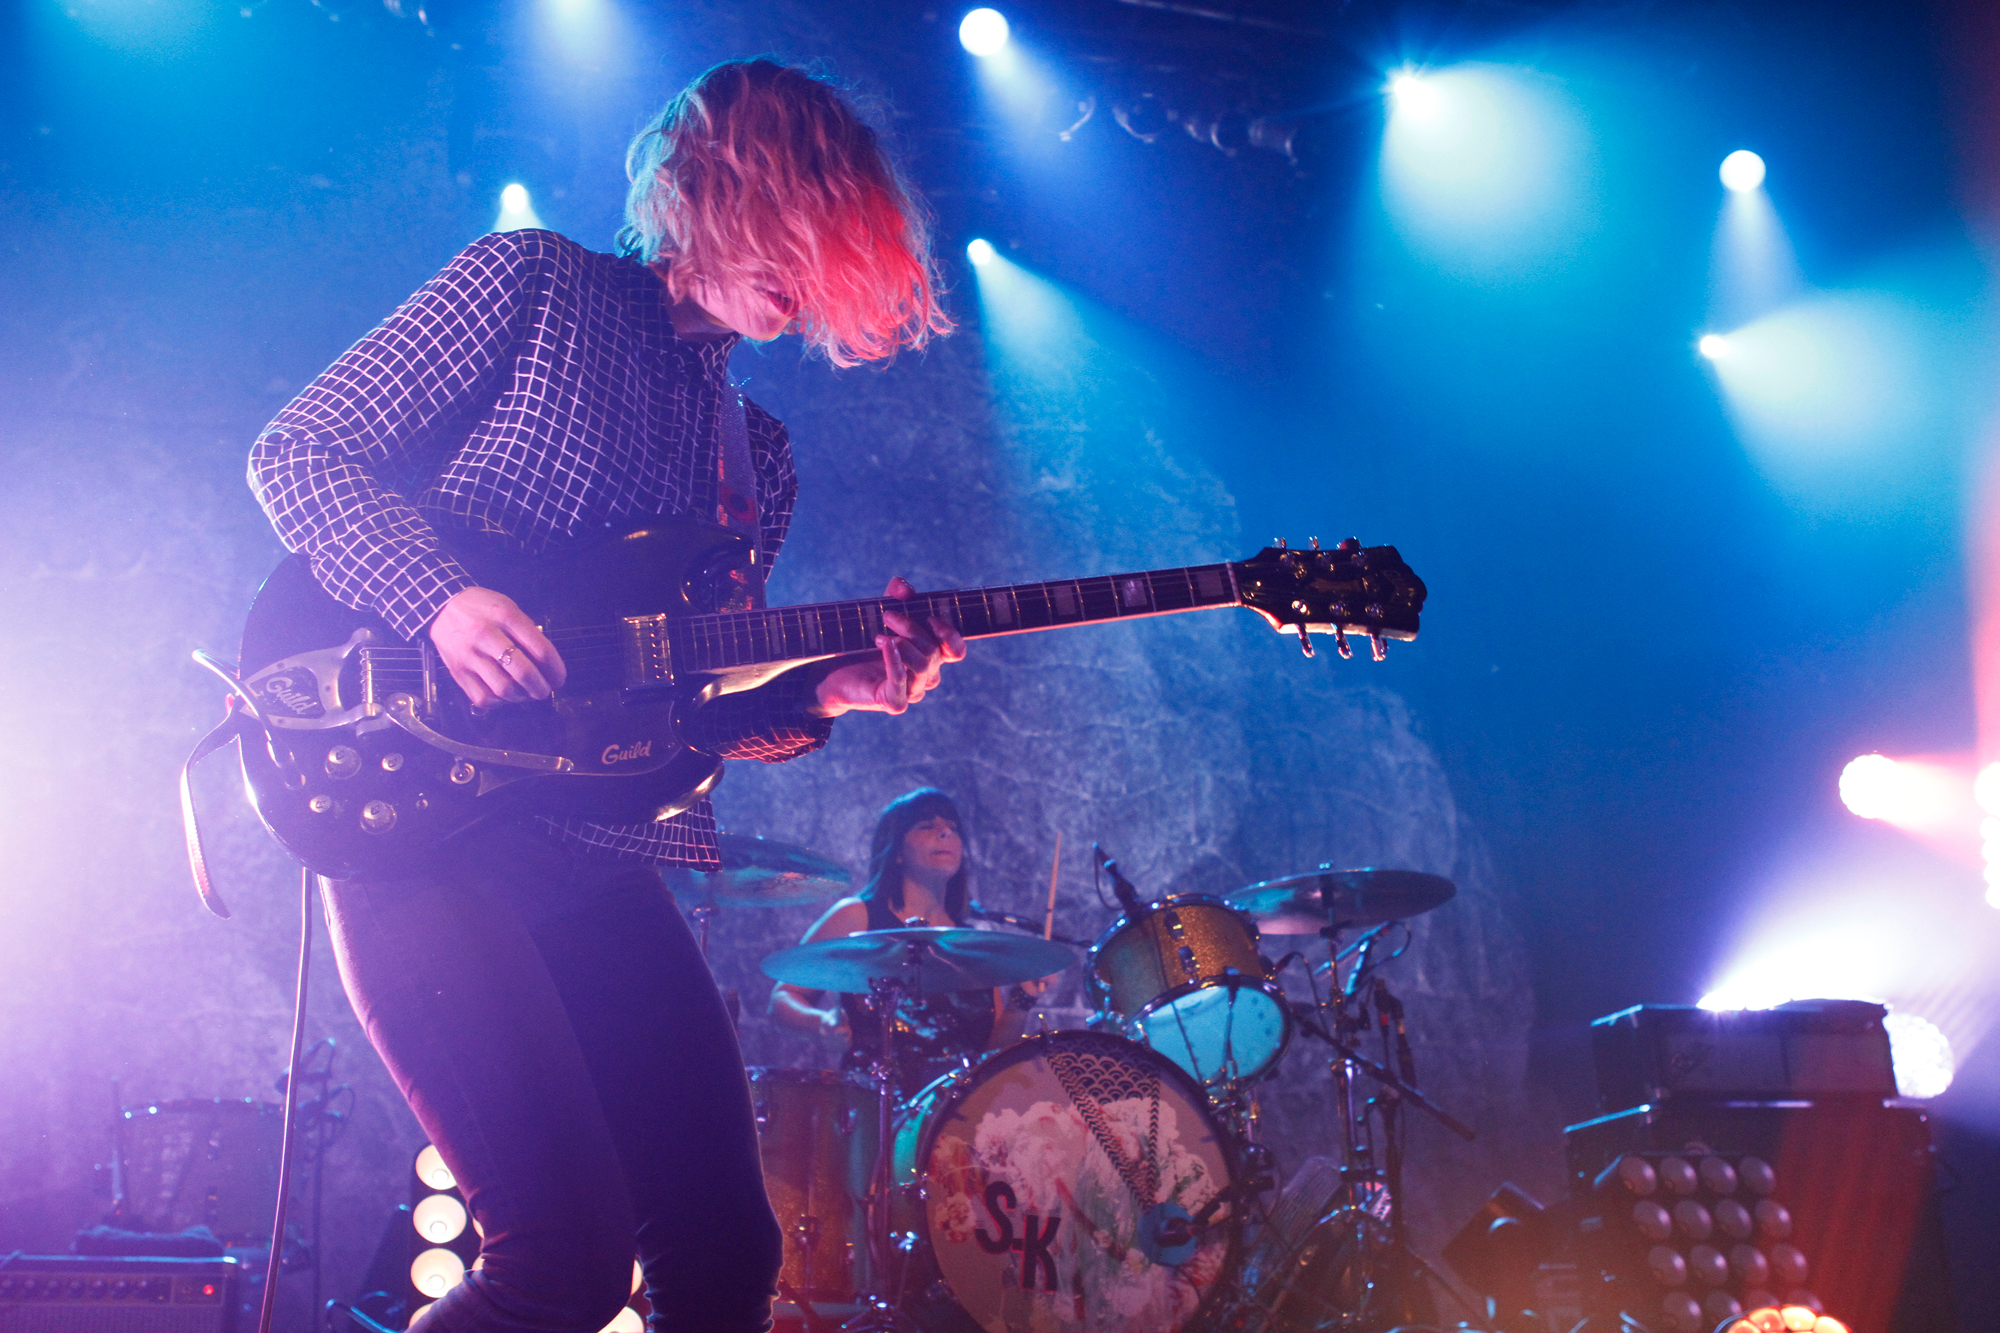 Sleater-Kinney plays at Terminal 5 in New York NY on Feb. 27, 2015.